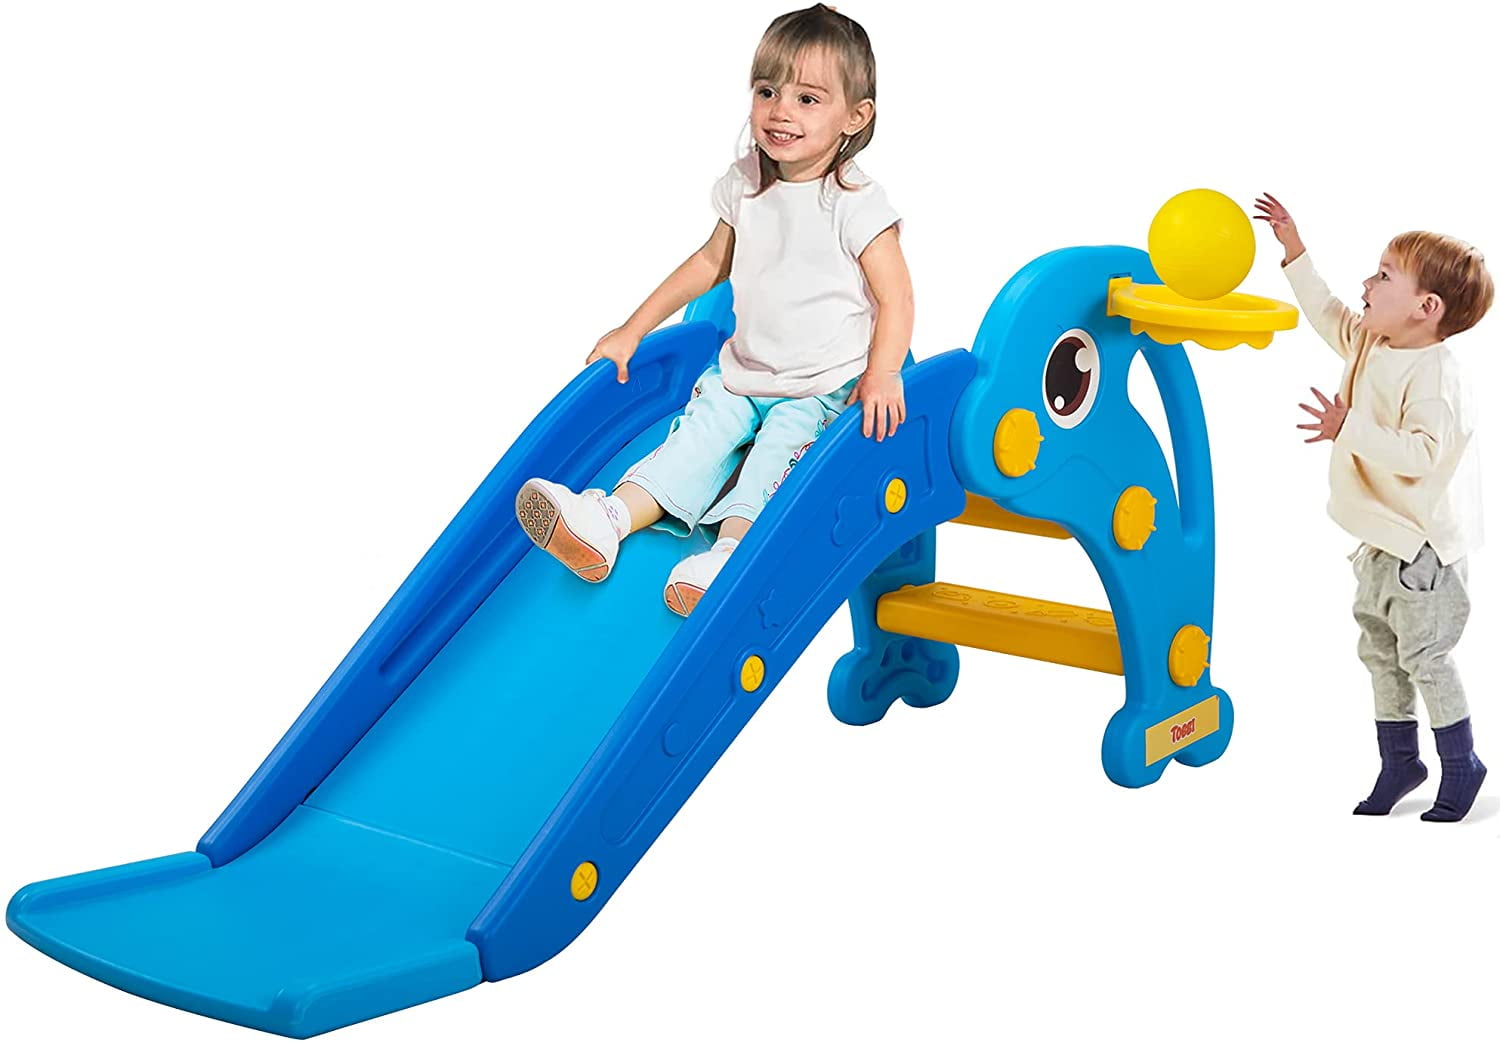 Toddler Slide, Freestanding Slide for Kid's, Playground Slipping Slide  Climber Toy Playset with Basketball Hoop & Ball for Baby Playing  Indoors/Outdoors, Sky Blue - Walmart.com - Walmart.com